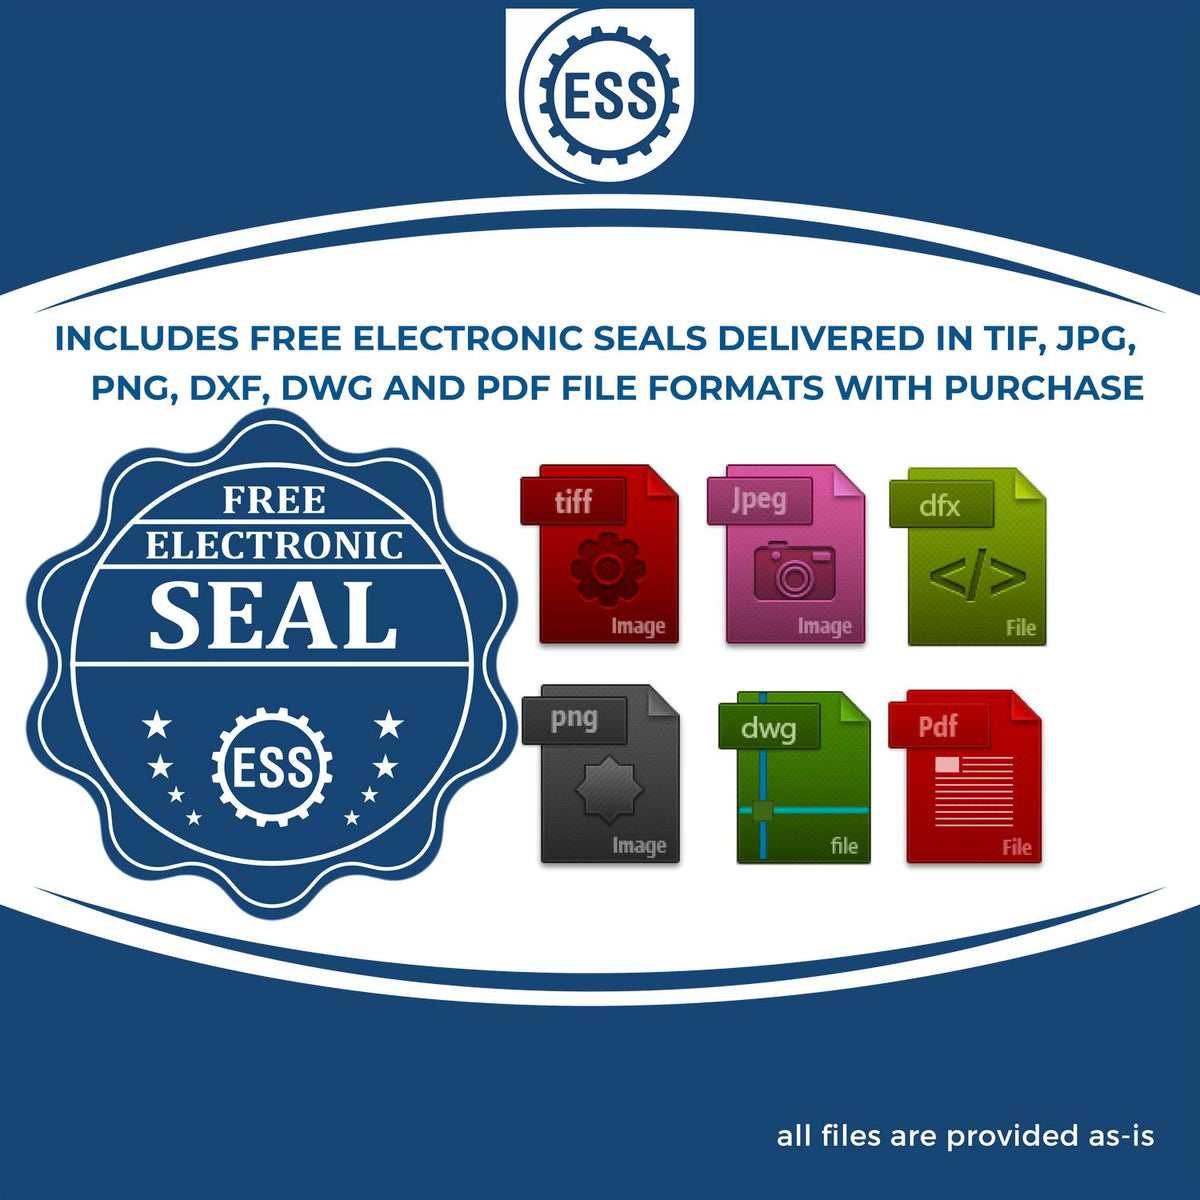 An infographic for the free electronic seal for the Hybrid Texas Architect Seal illustrating the different file type icons such as DXF, DWG, TIF, JPG and PNG.